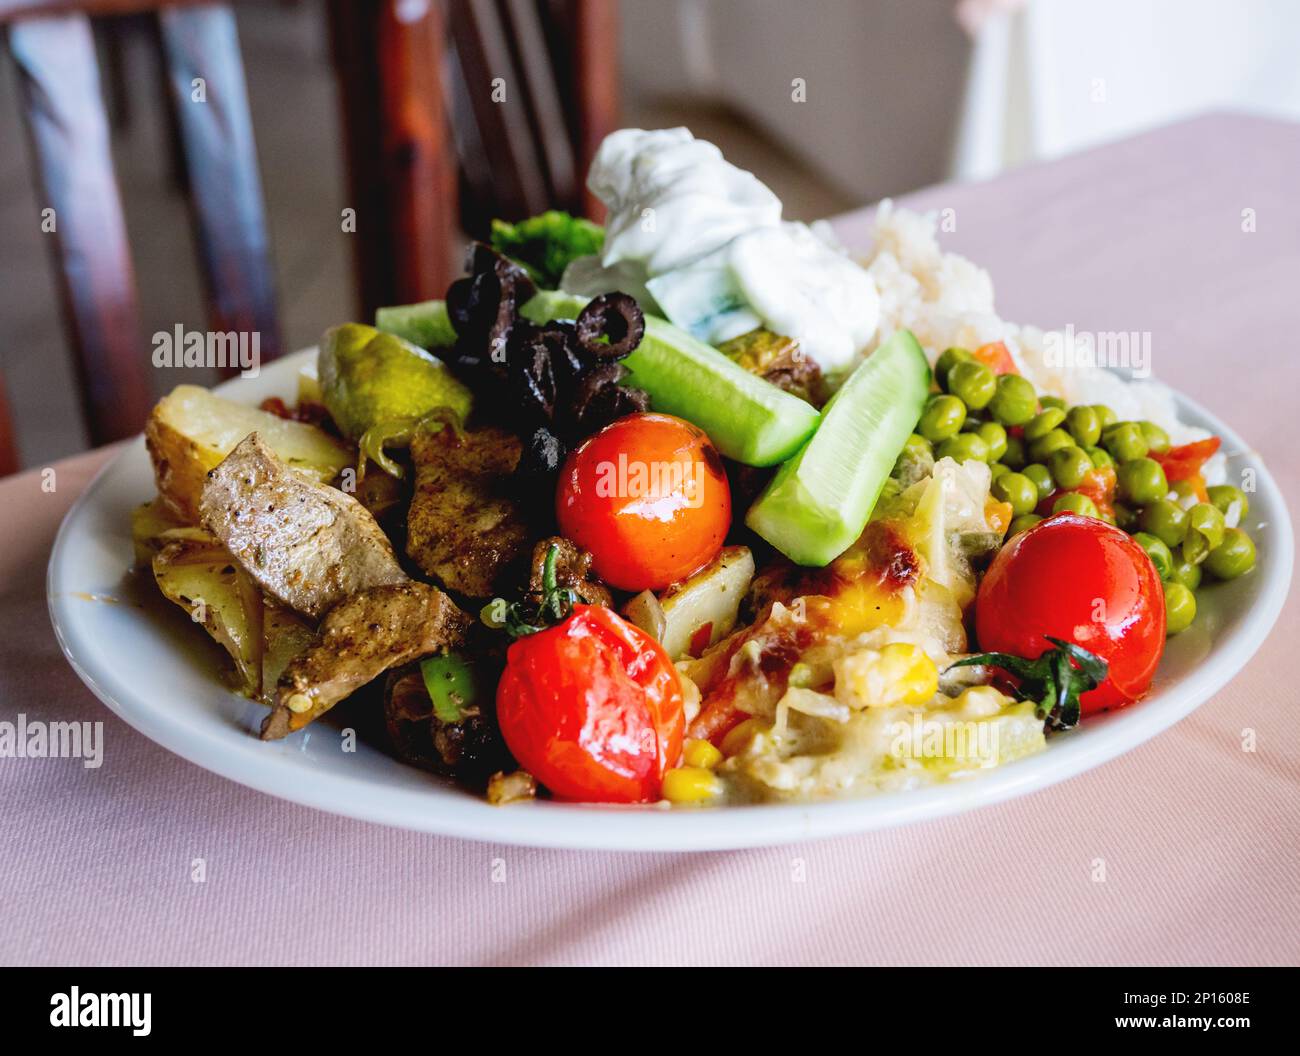 Healthy dinner - plate full of stewed vegetables, rice and meat with natural yogurt. Stock Photo